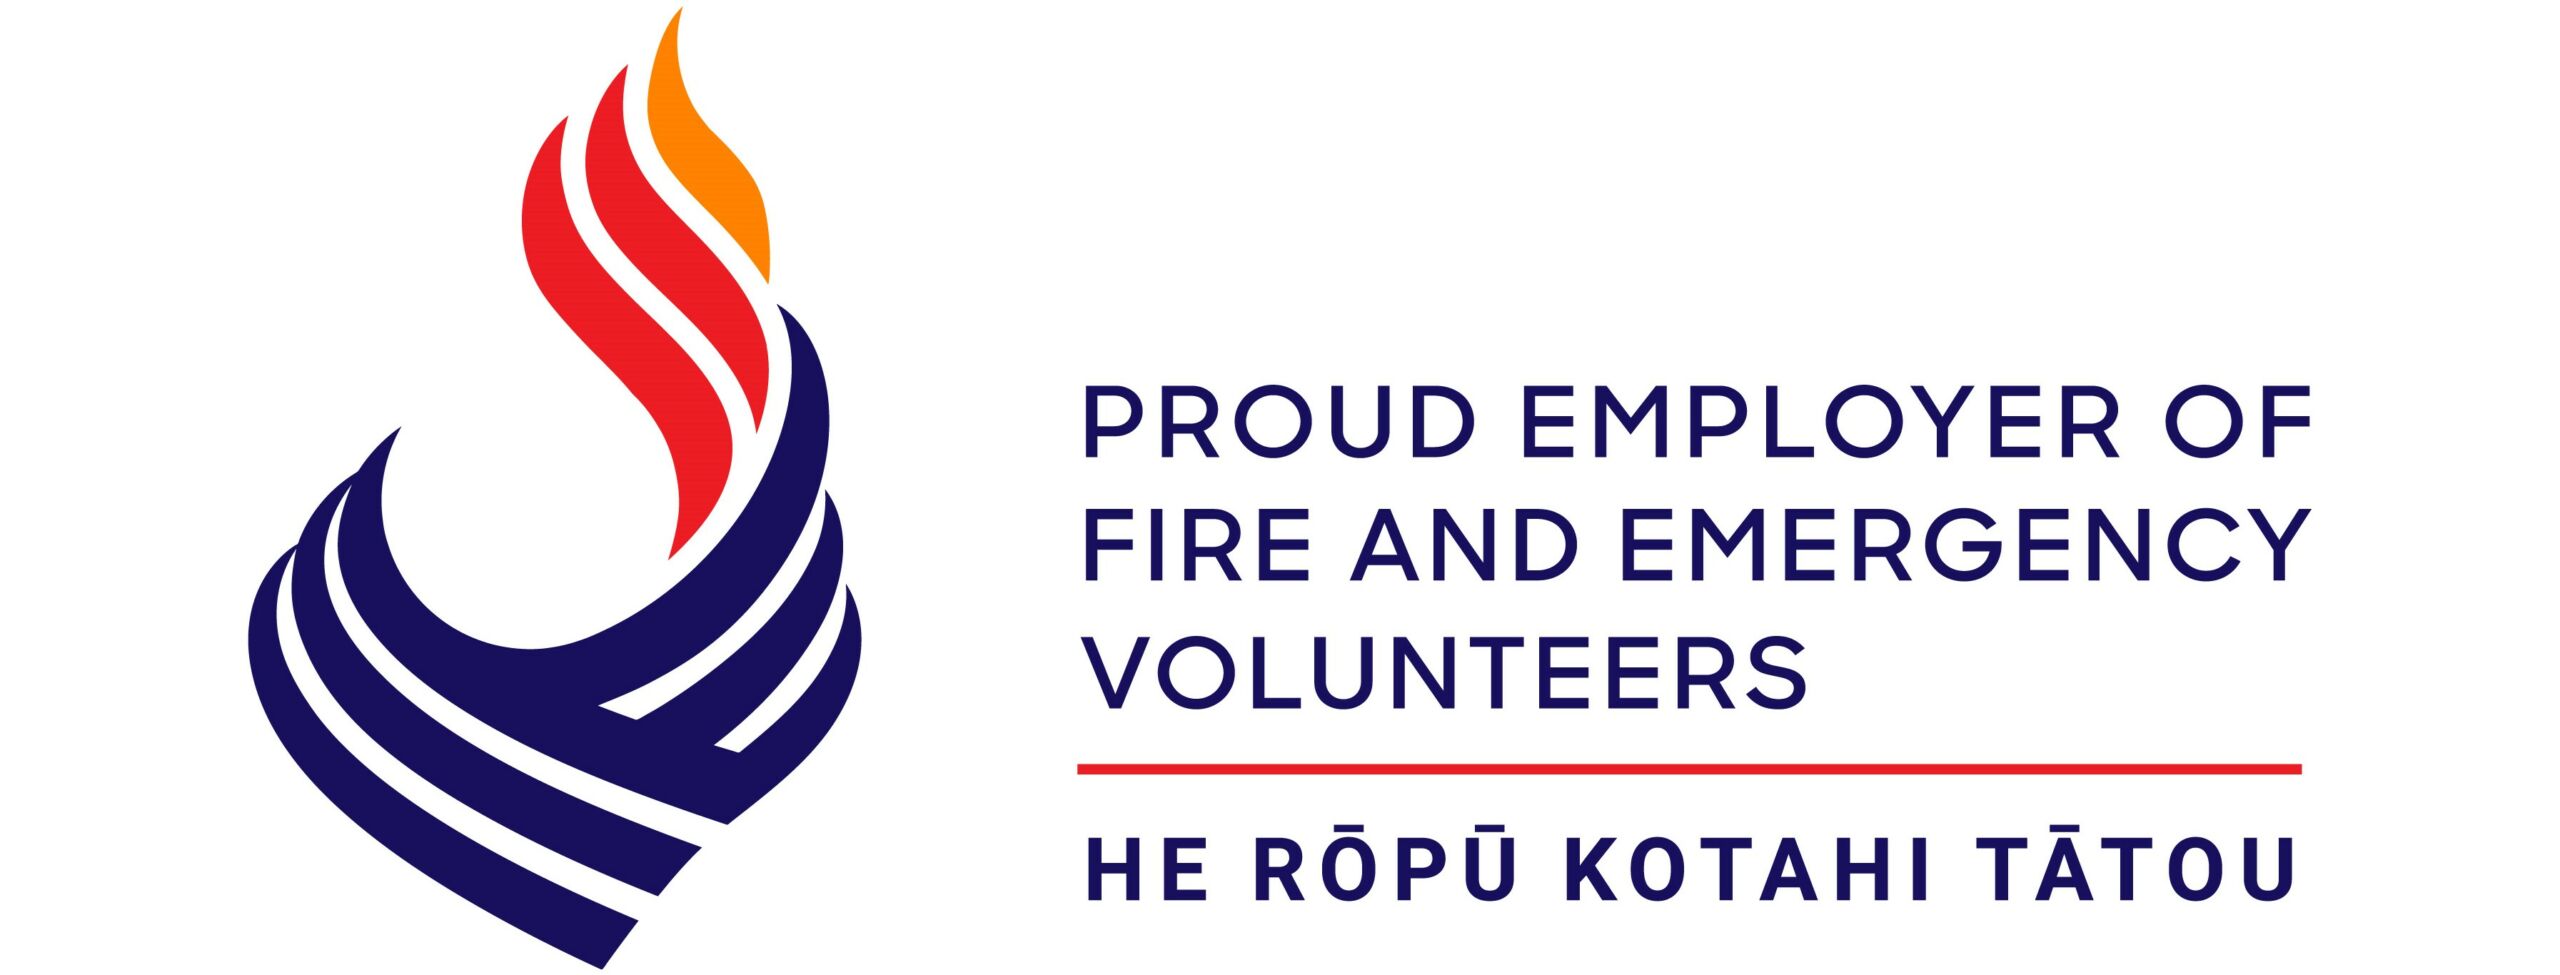 Proud Employer of Fire and Emergency Volunteers